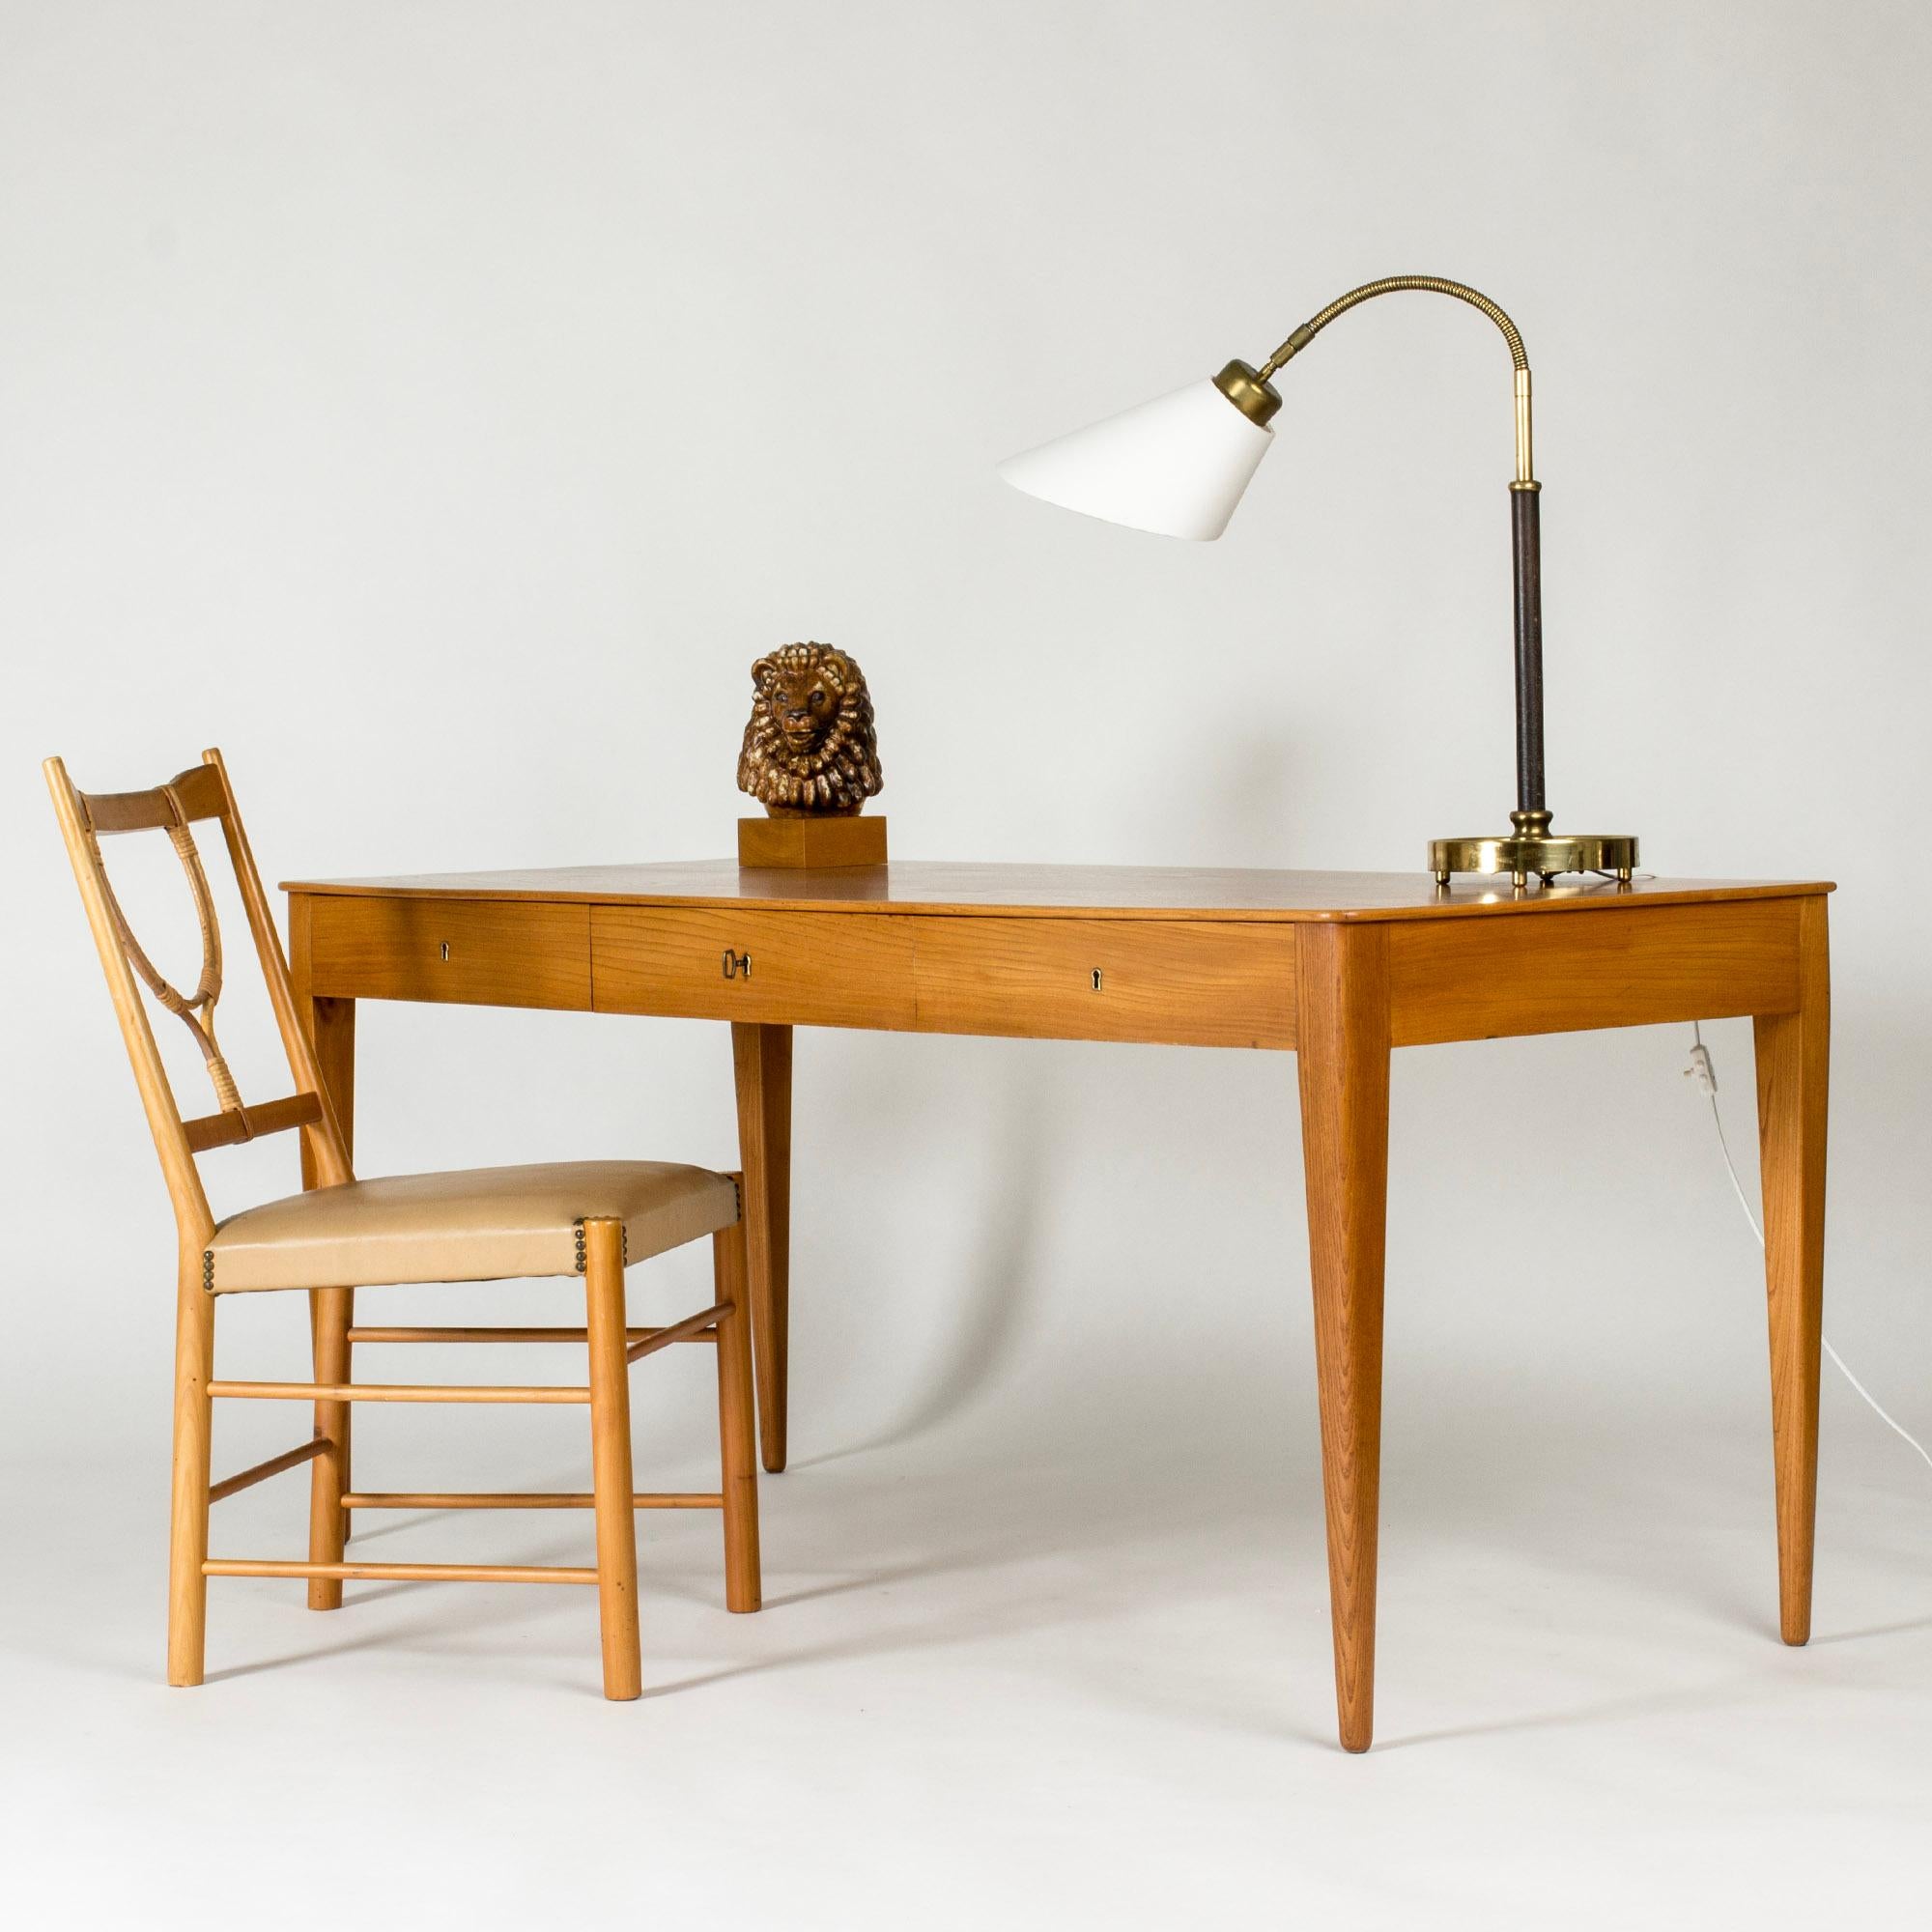 Beautiful desk by Josef Frank, made from elm with striking woodgrain. Clean lines and subtly rounded forms, a timeless piece.